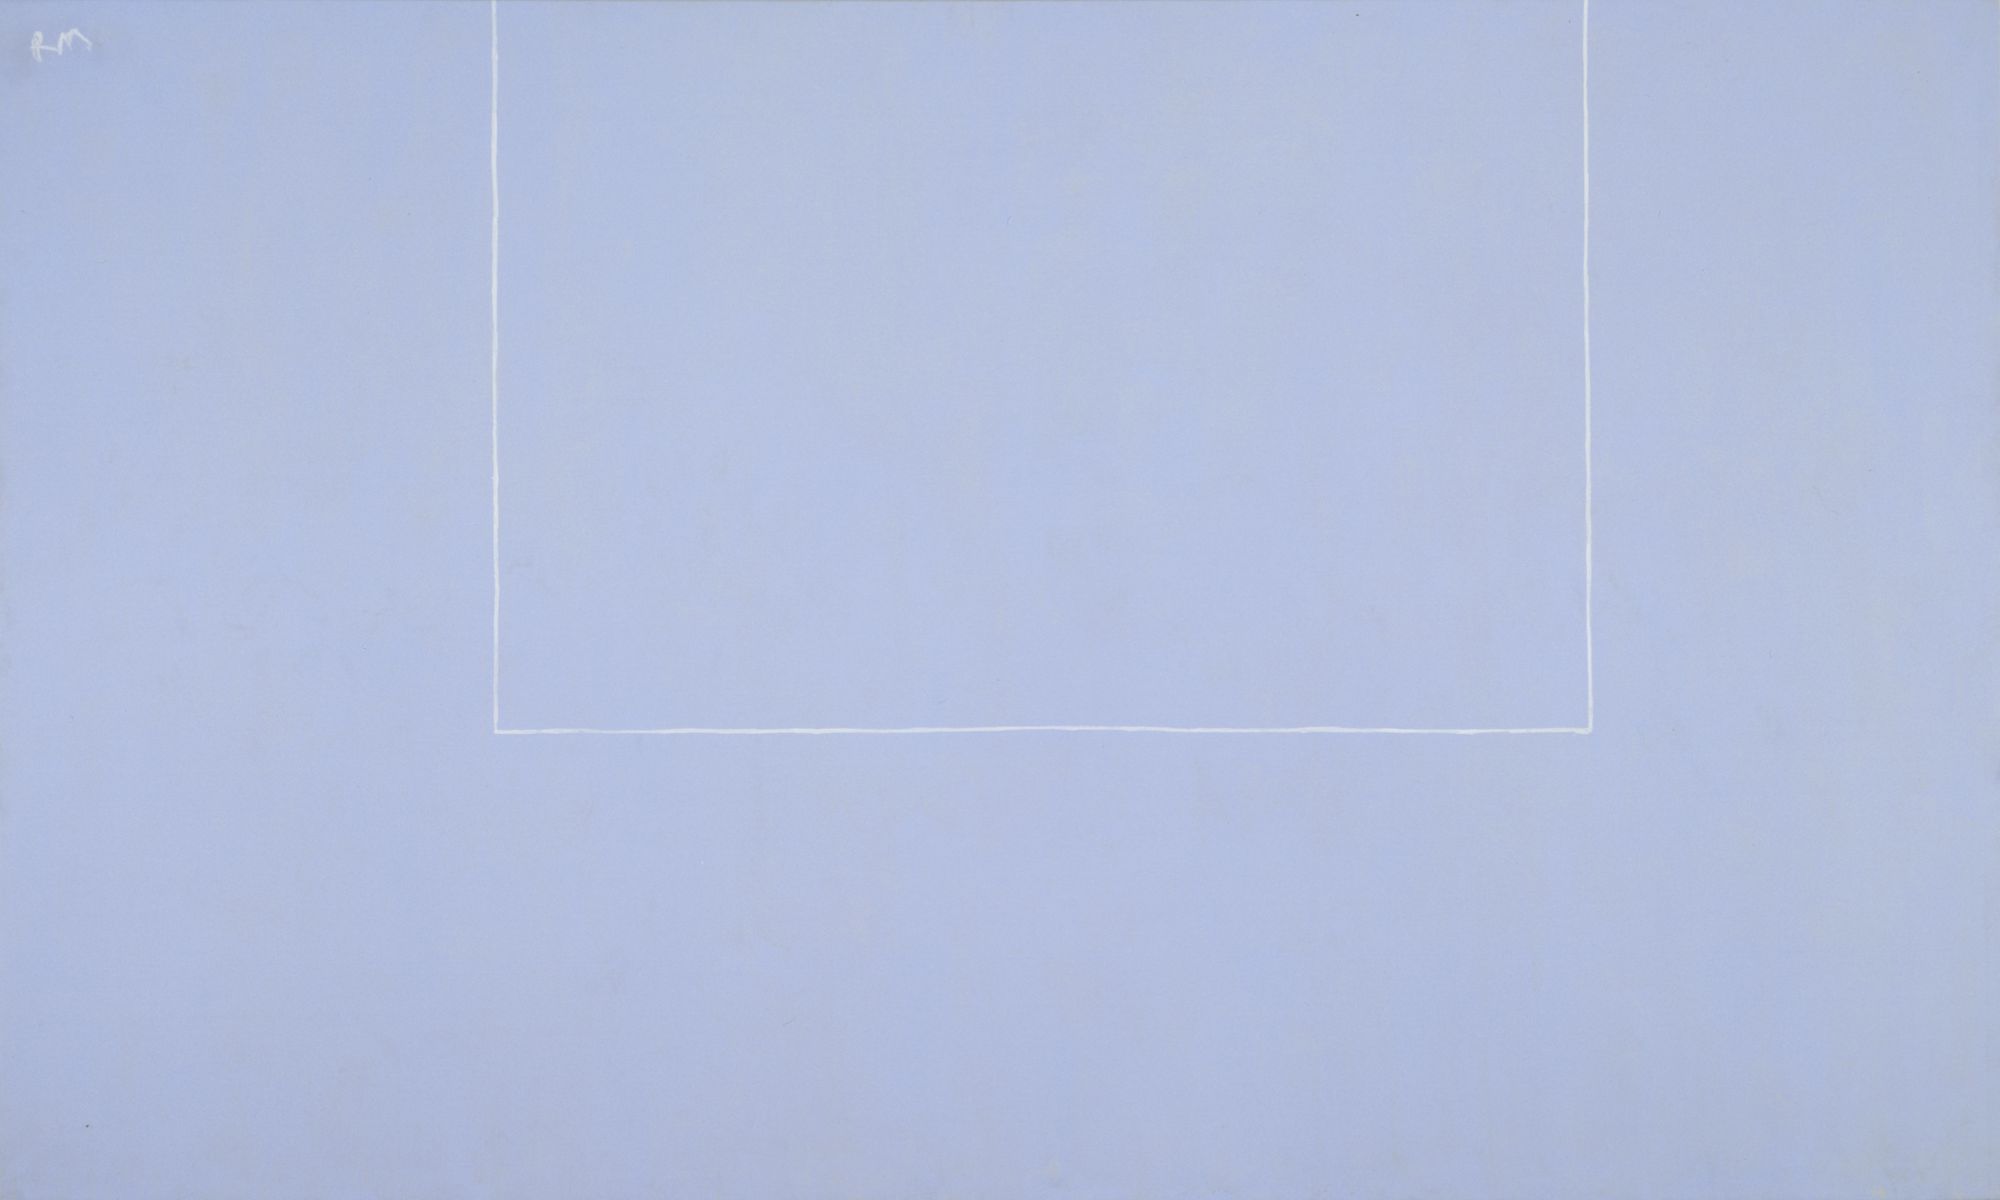 Open No. 15: In Cerulean Blue with White Line, 1968. Acrylic on canvas, 85 ½ x 143 ¾ inches (217.2 x 365.1 cm)